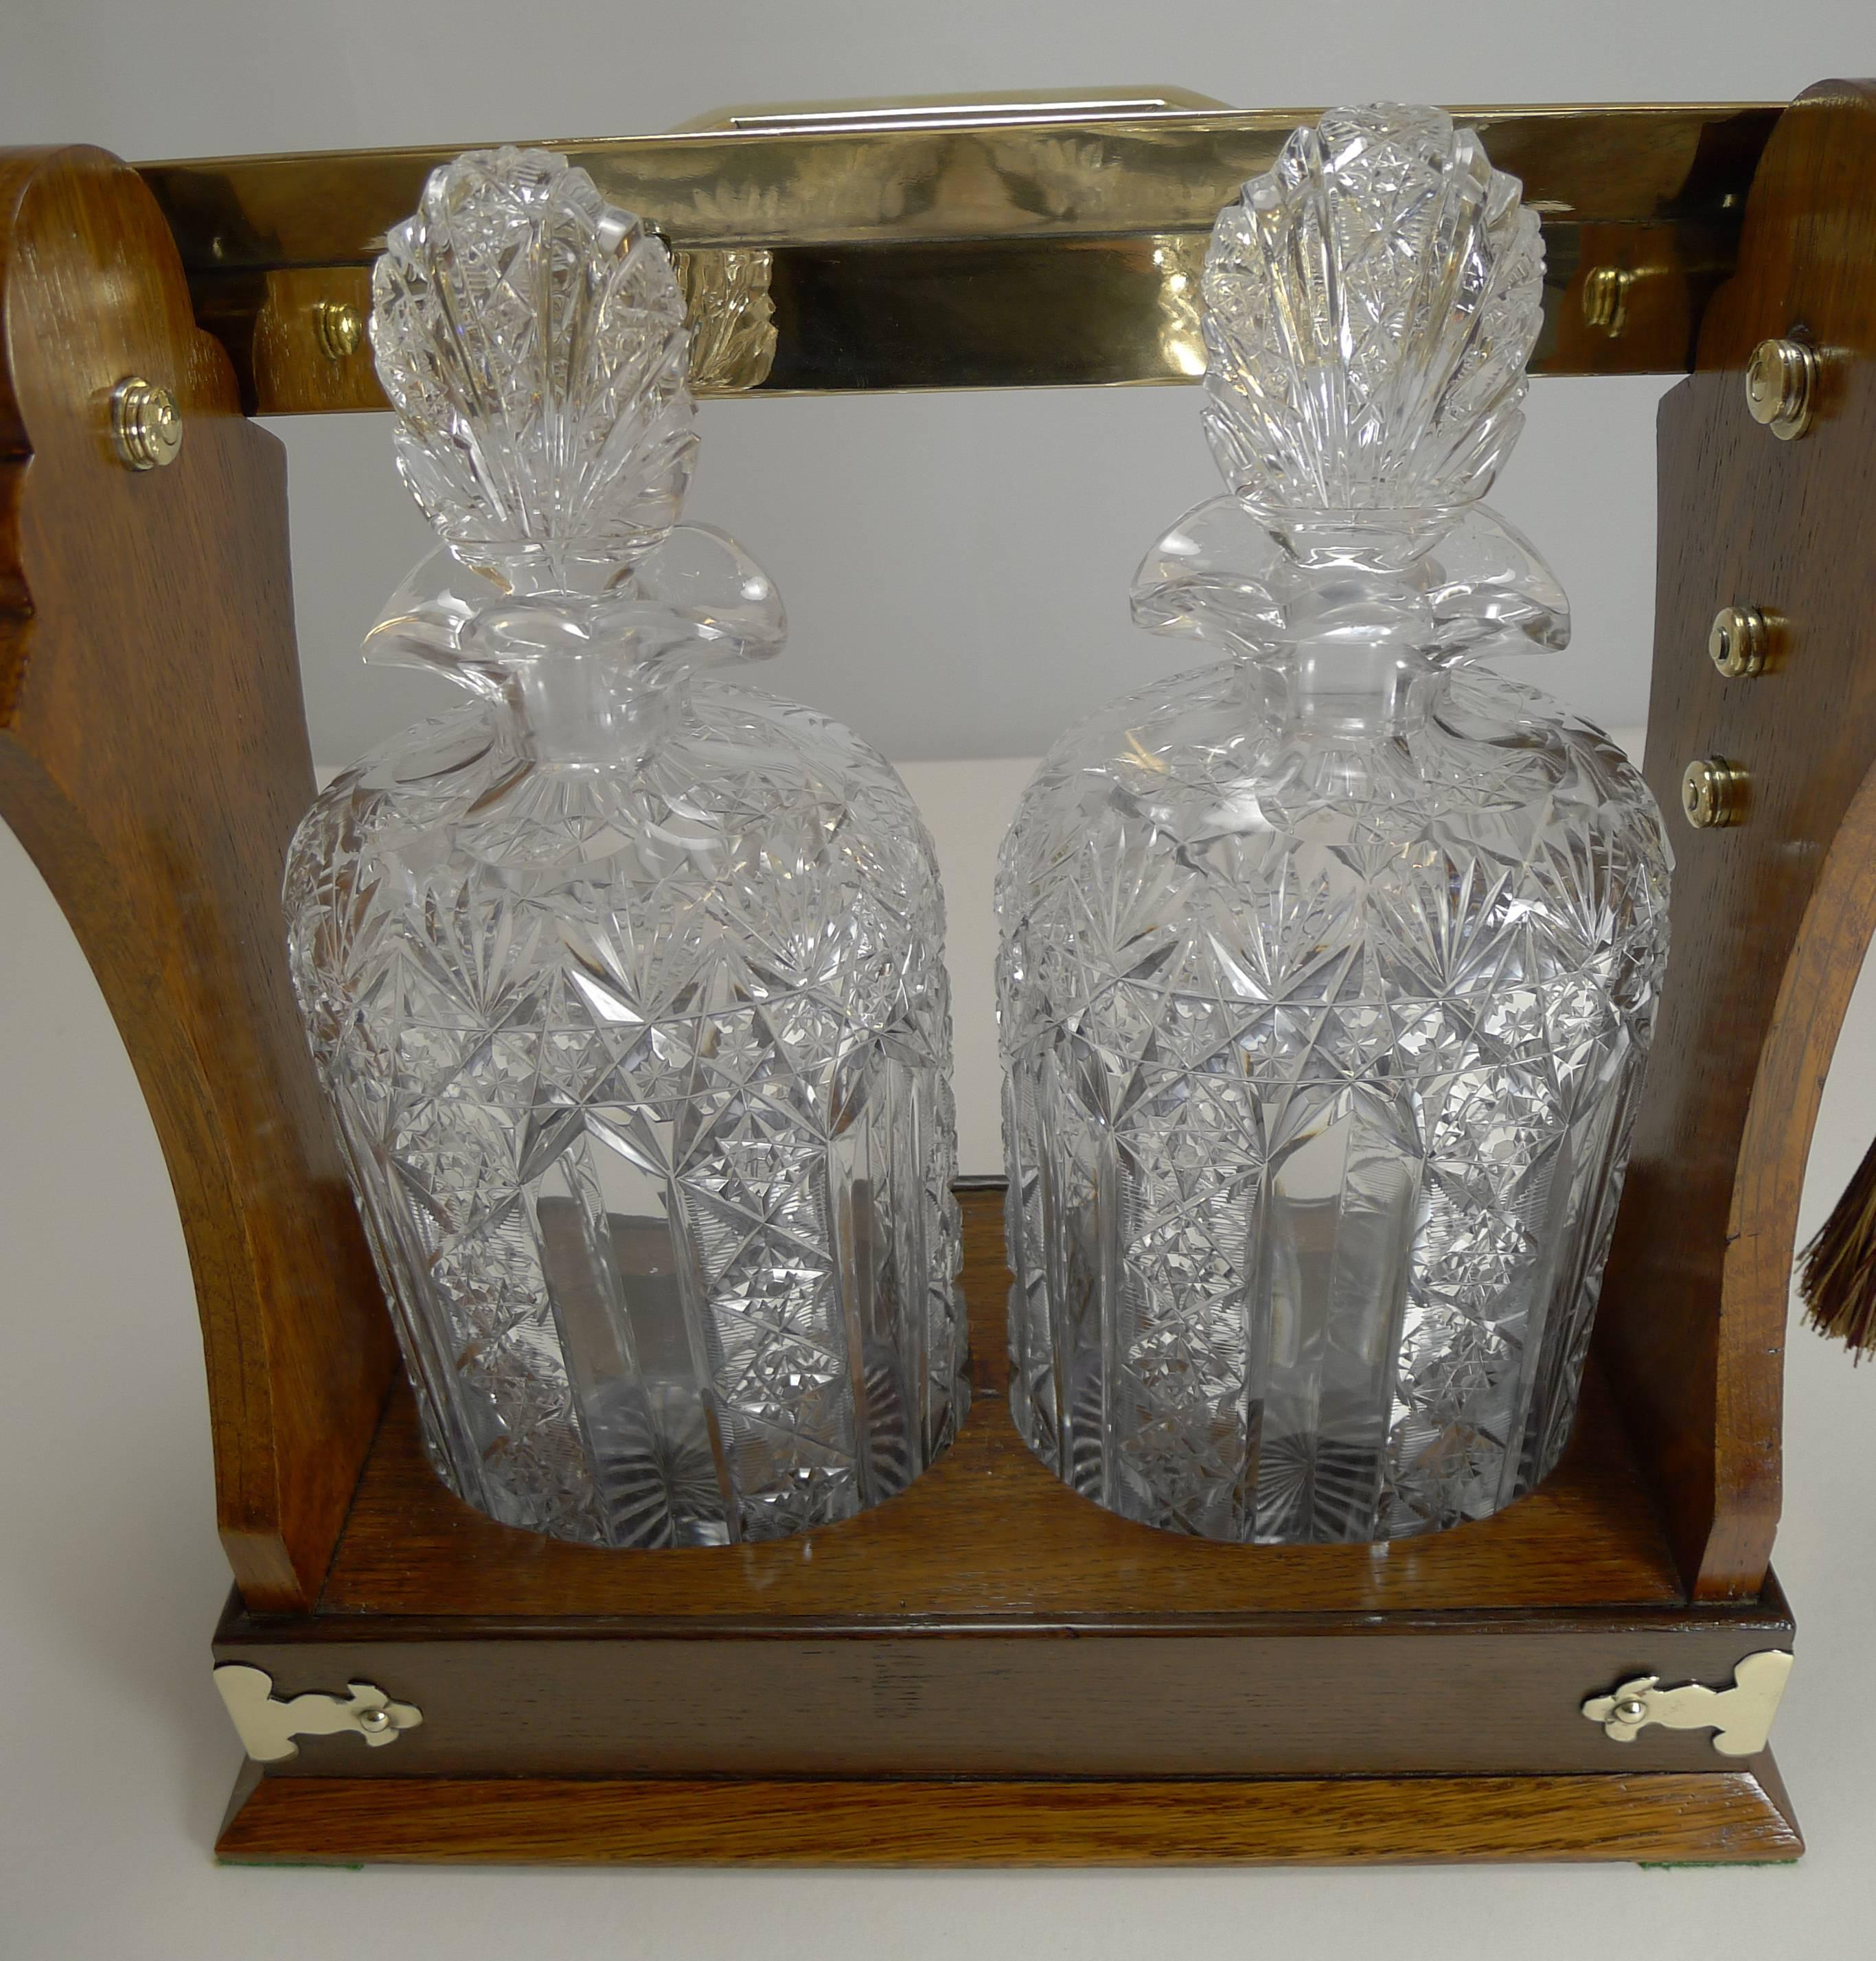 19th Century Antique English Tantalus Exceptional Cut Crystal Oval Decanters, circa 1890